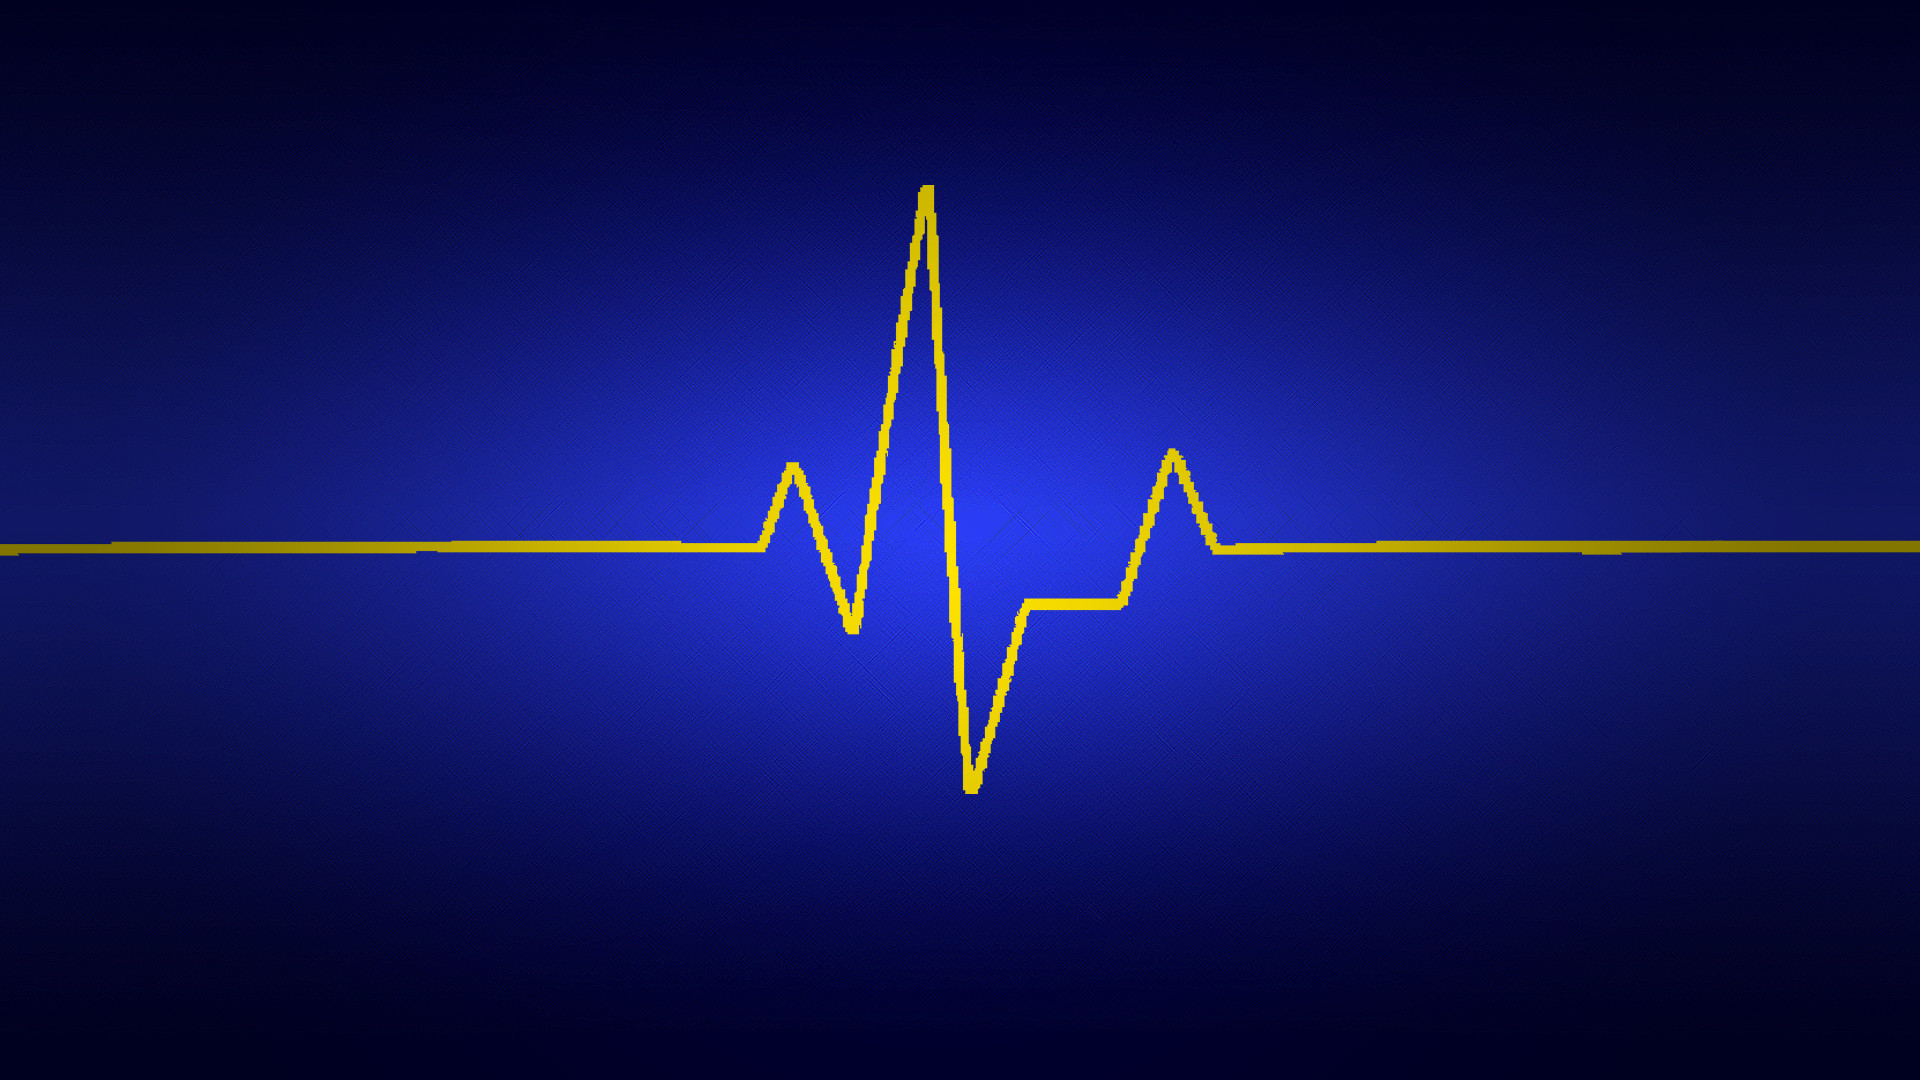 Heartbeat Line Wallpaper Images Pictures   Becuo